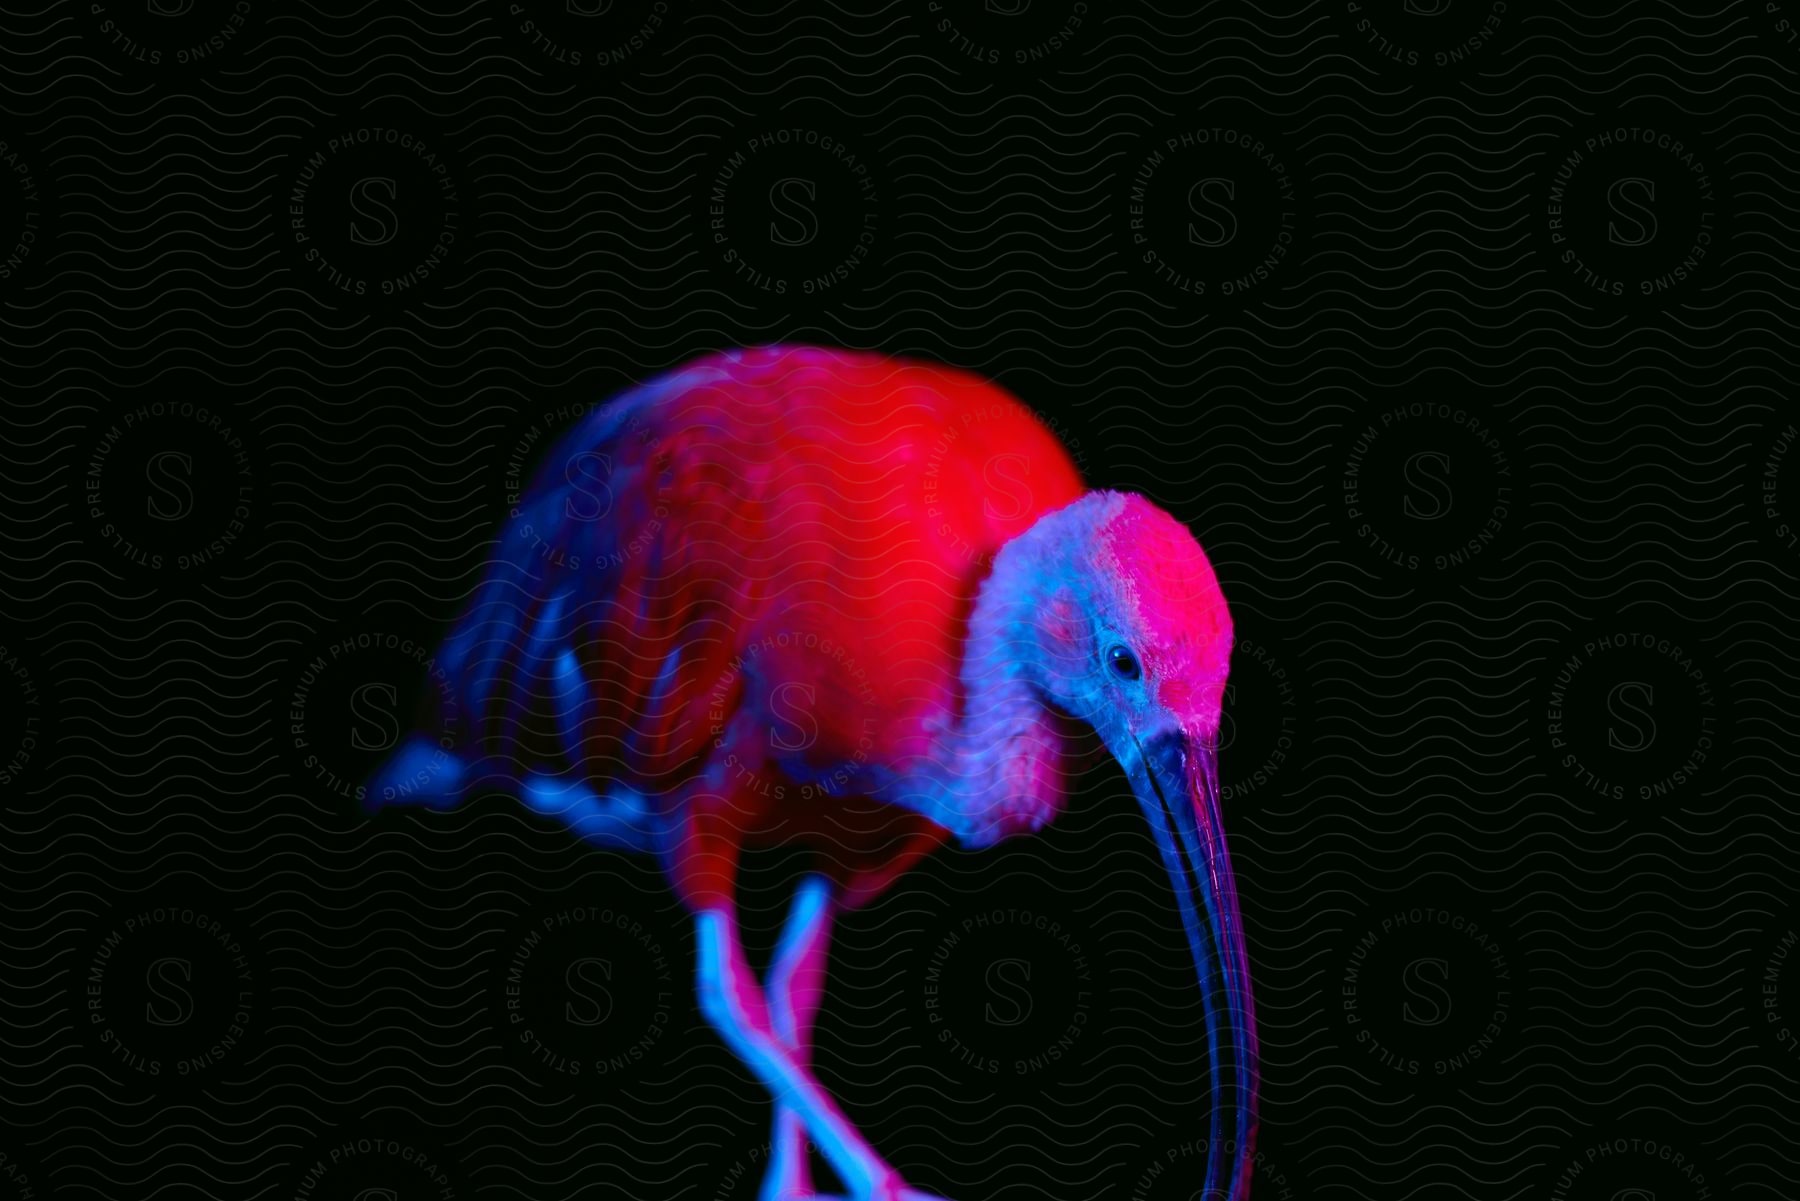 Stock photo of close-up of a scarlet ibis with contrasting red lights on a black background.